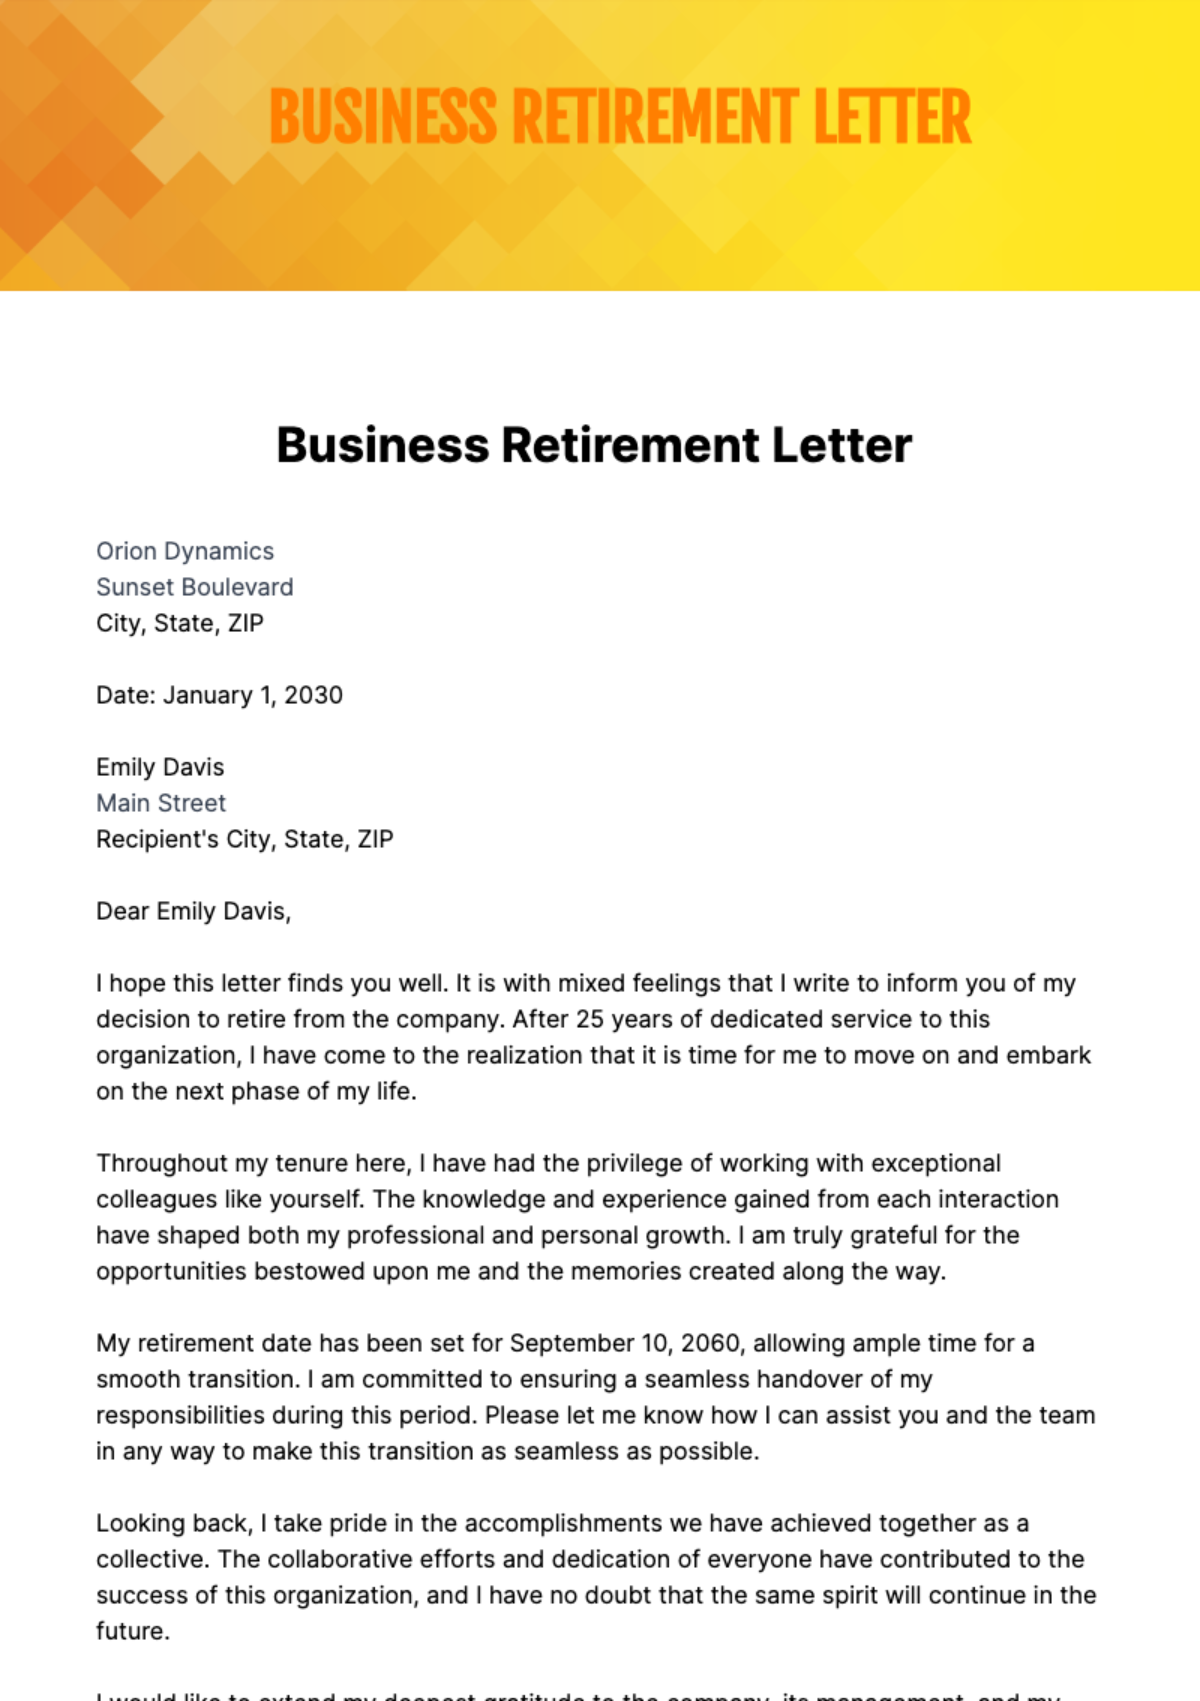 Free Business Retirement Letter Template